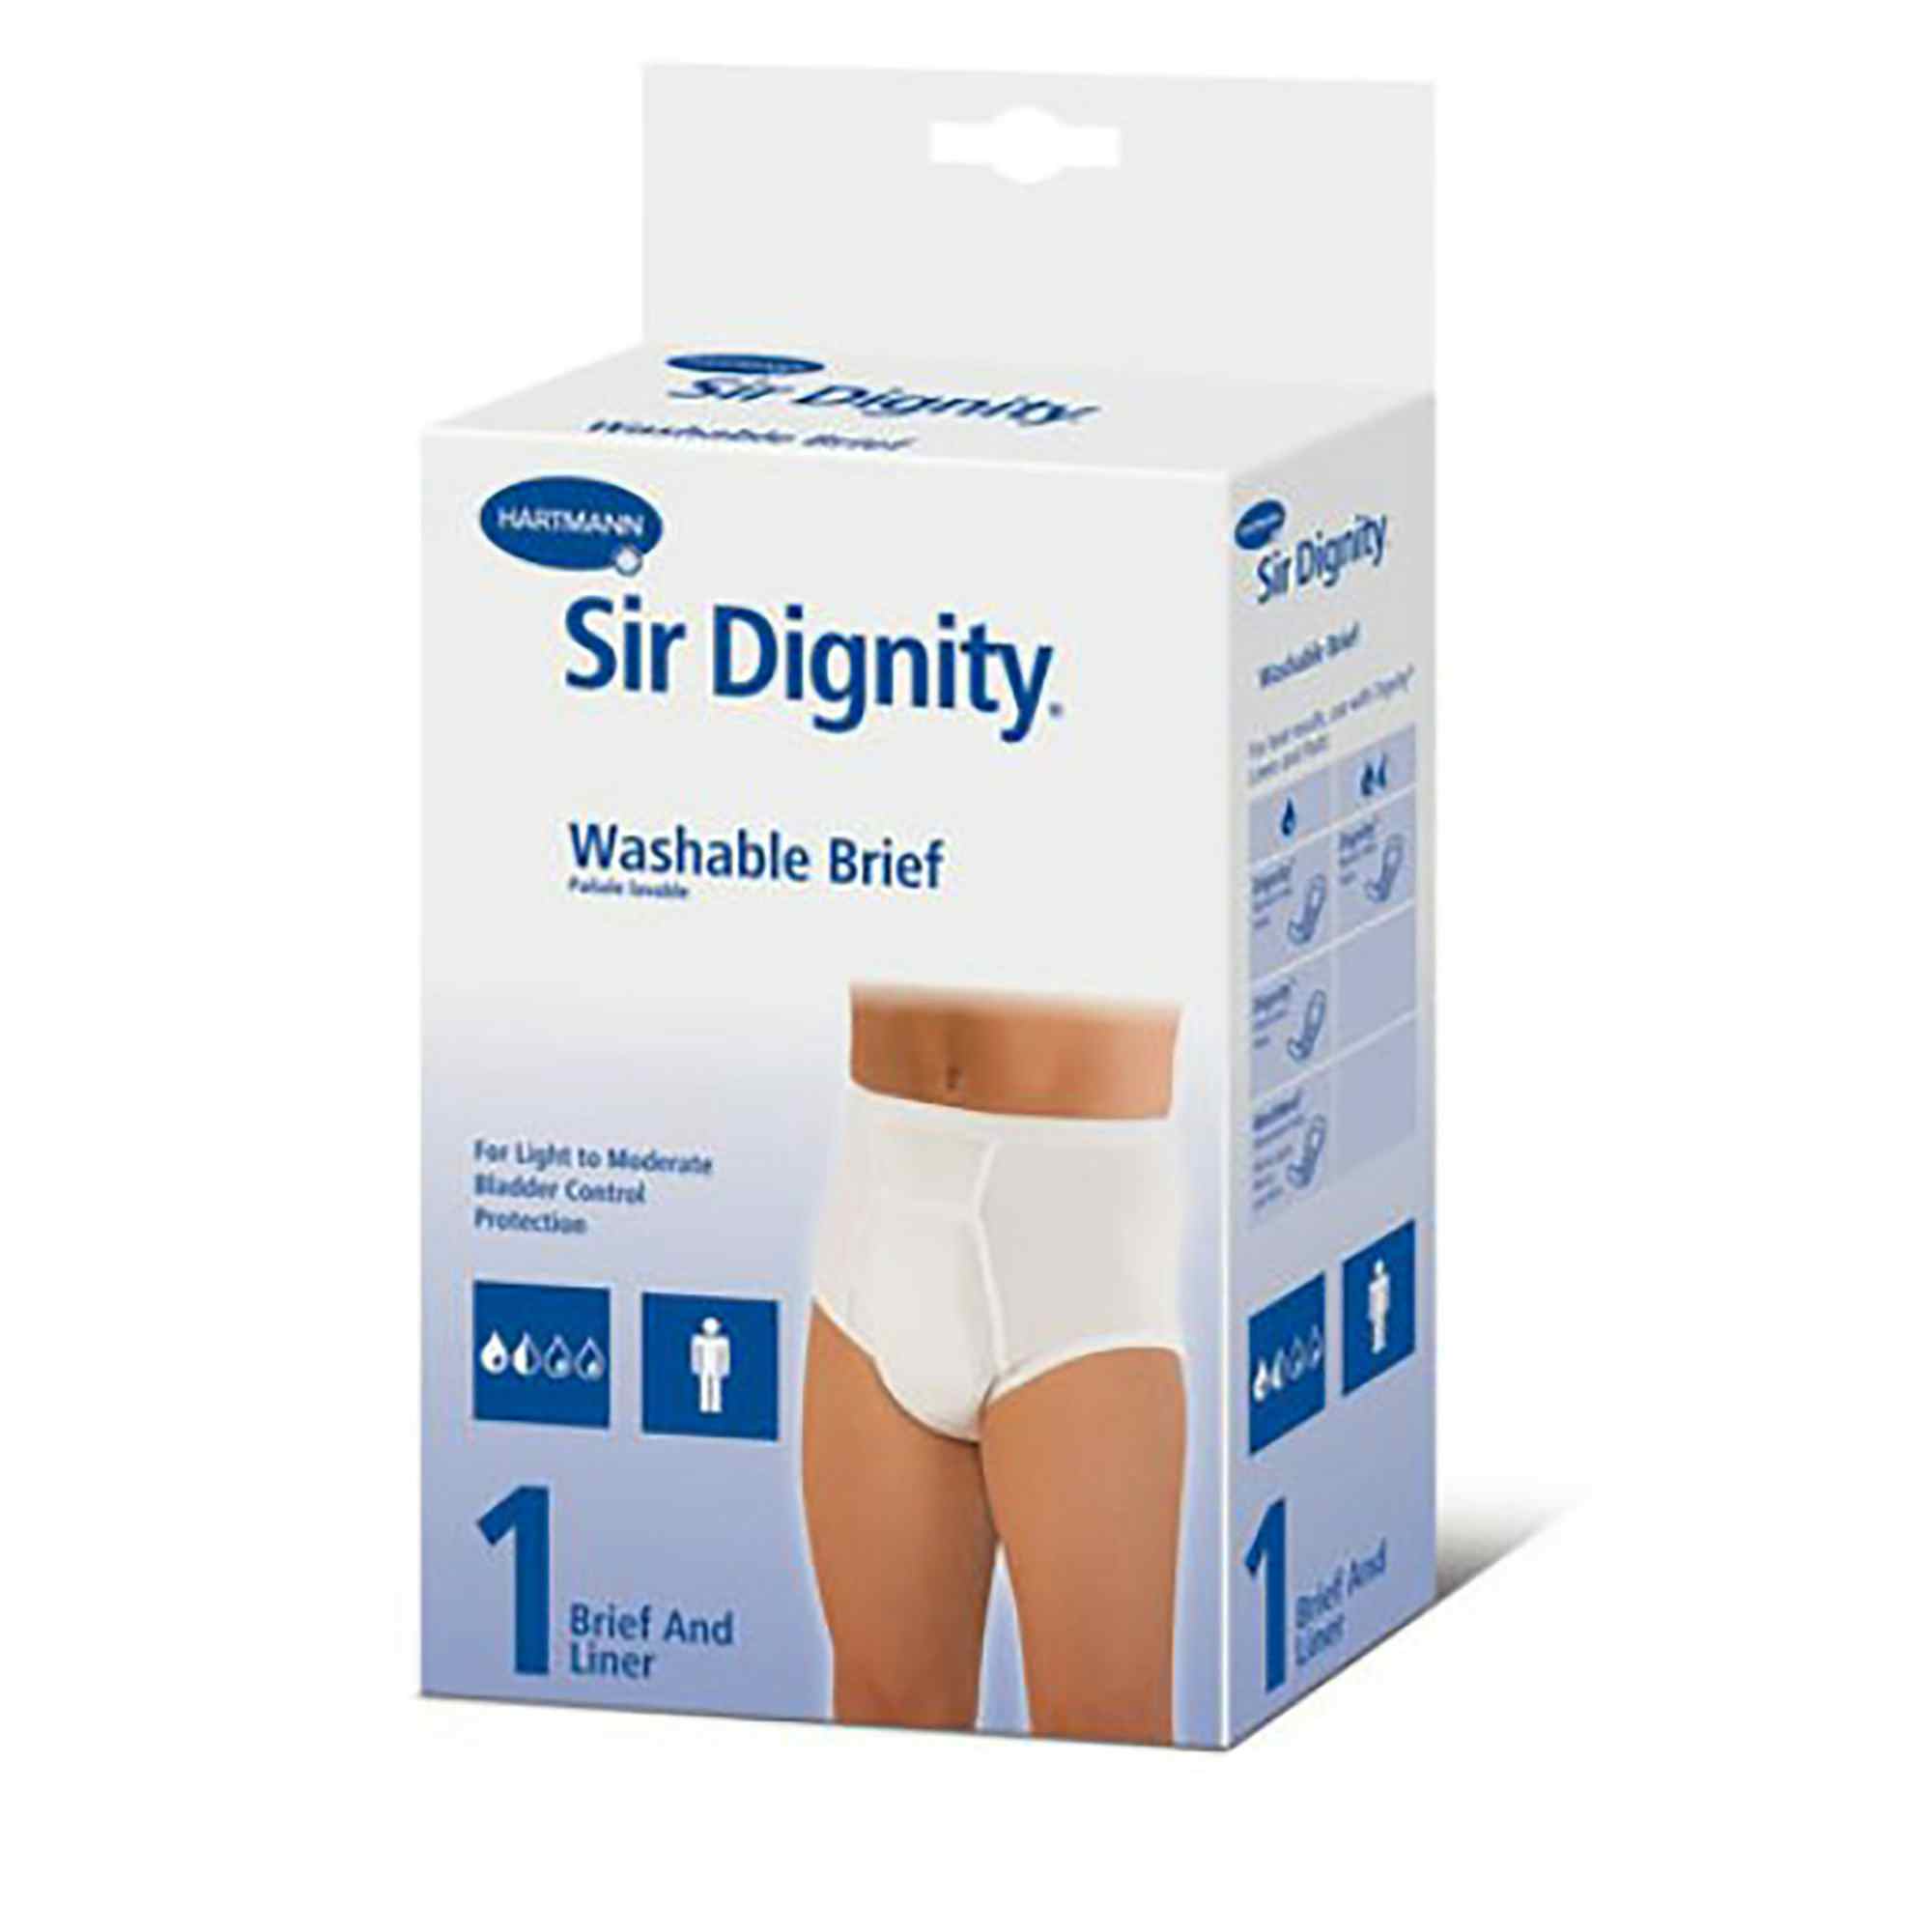 Sir Dignity Male Pull On Reusable Protective Underwear with Liner, 40212, Medium (34-36") - 1 Each